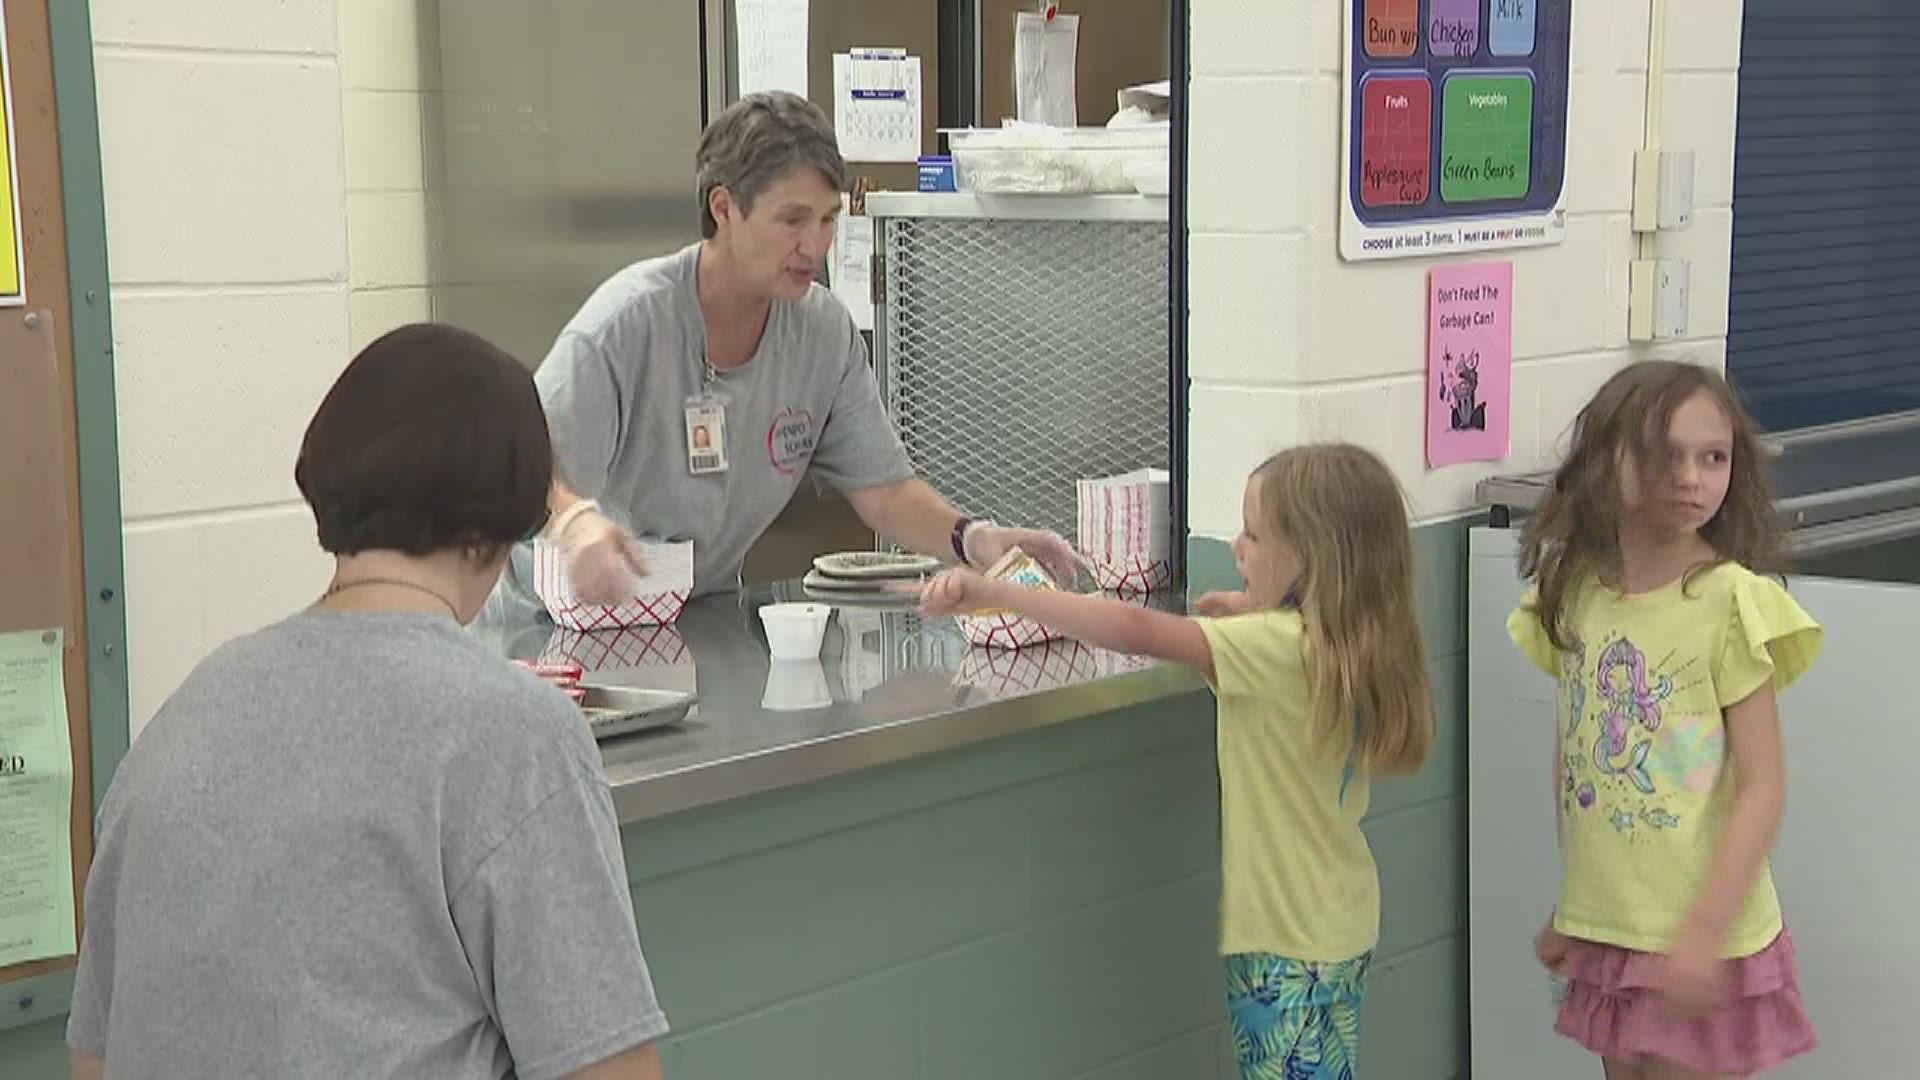 The program plans to serve about 60,000 meals to students over the next seven weeks.